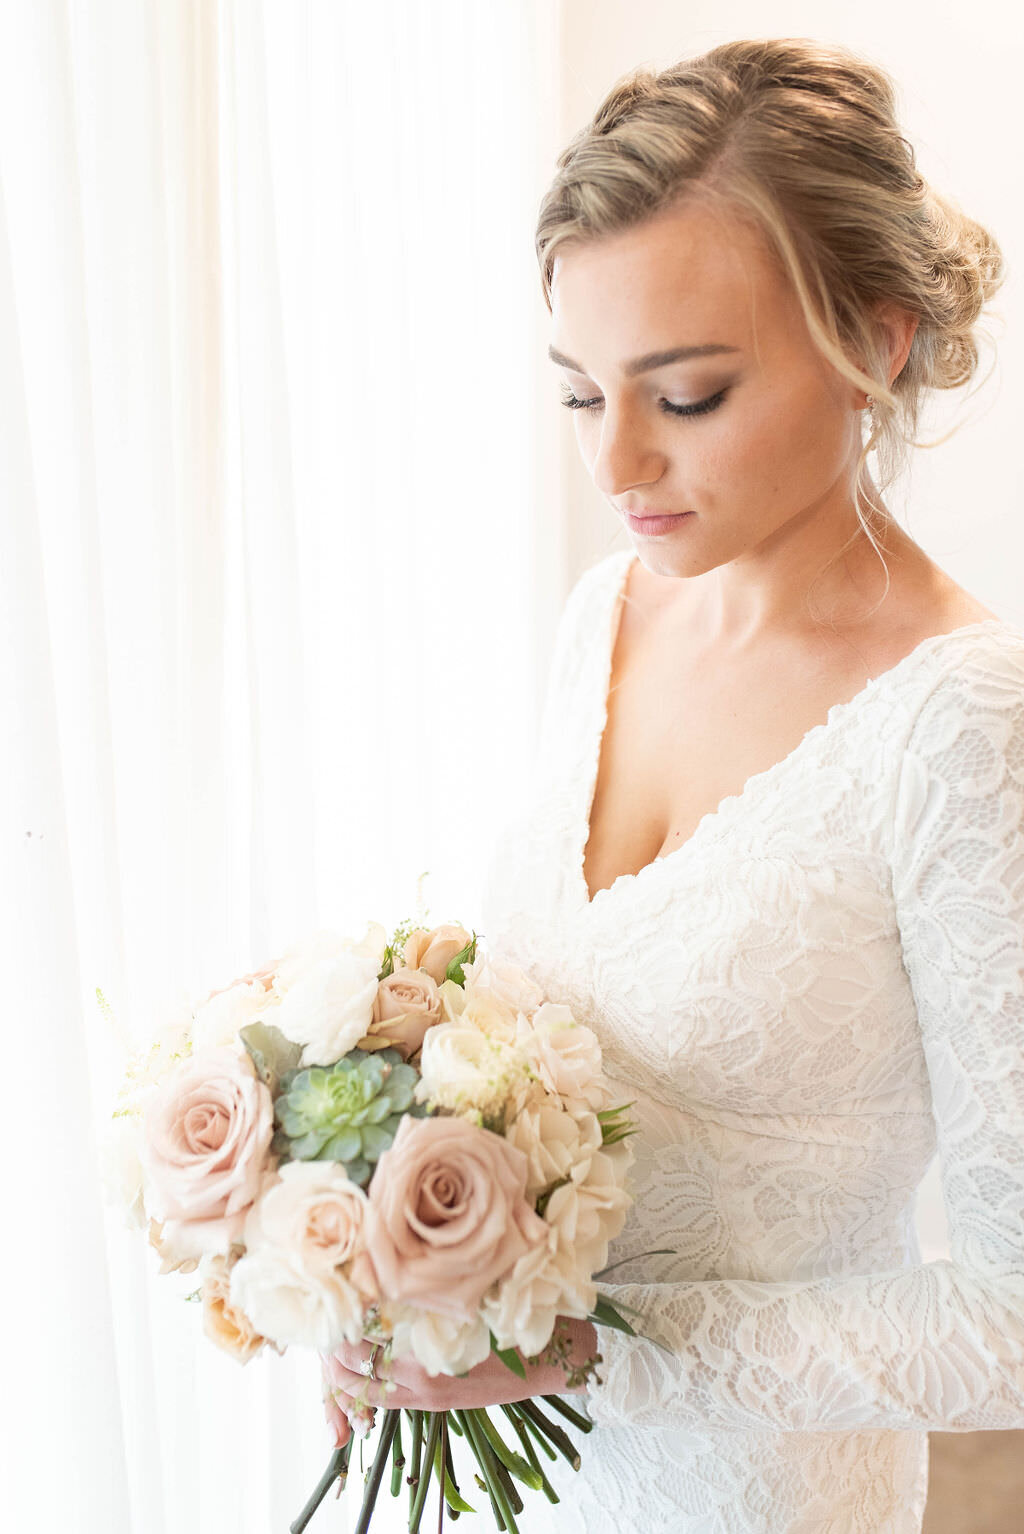 A bride looking down at a bouquet in her hands.